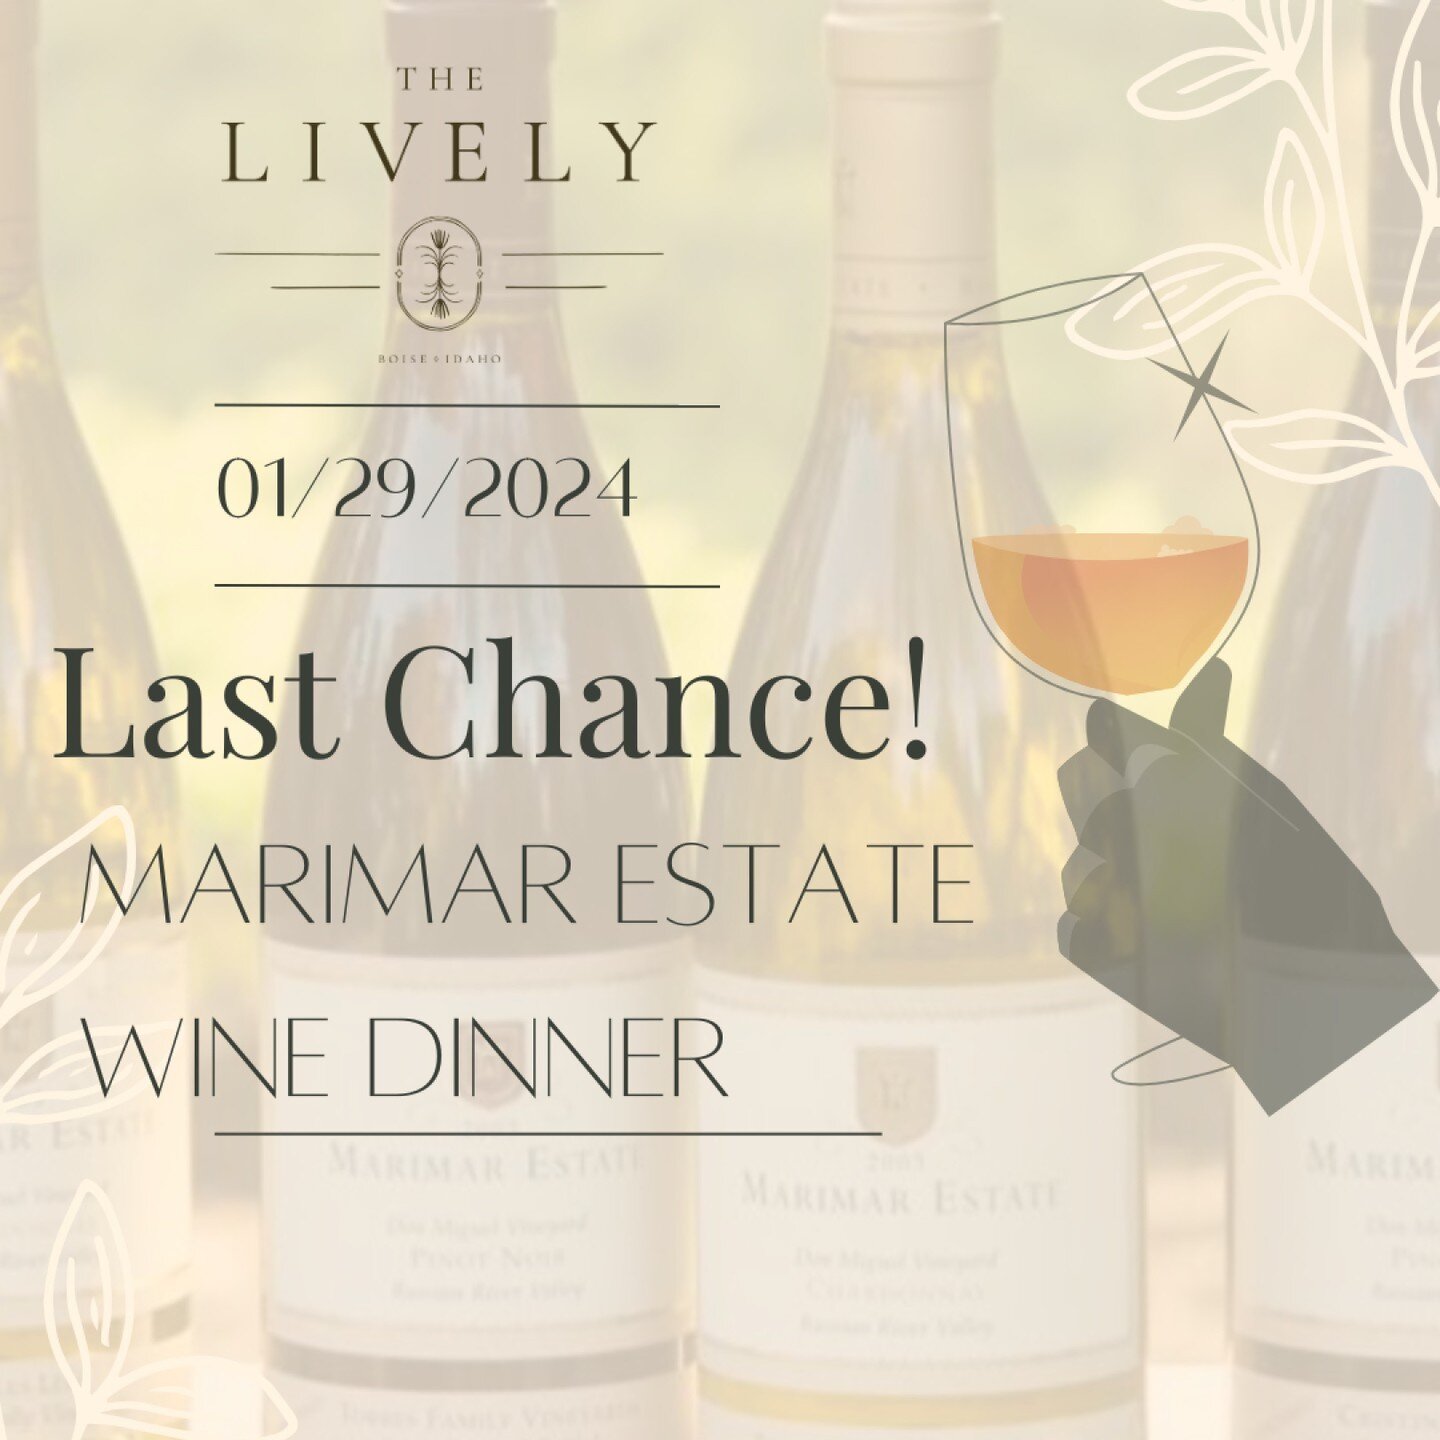 Today is the last day to secure tickets to our January Wine Dinner With Marimar Estate!
.
Join Cristina Torres, 5th generation of family owned and operated Marimar Estate-as she takes you through a selection of Marimar Estate wines, each perfectly pa